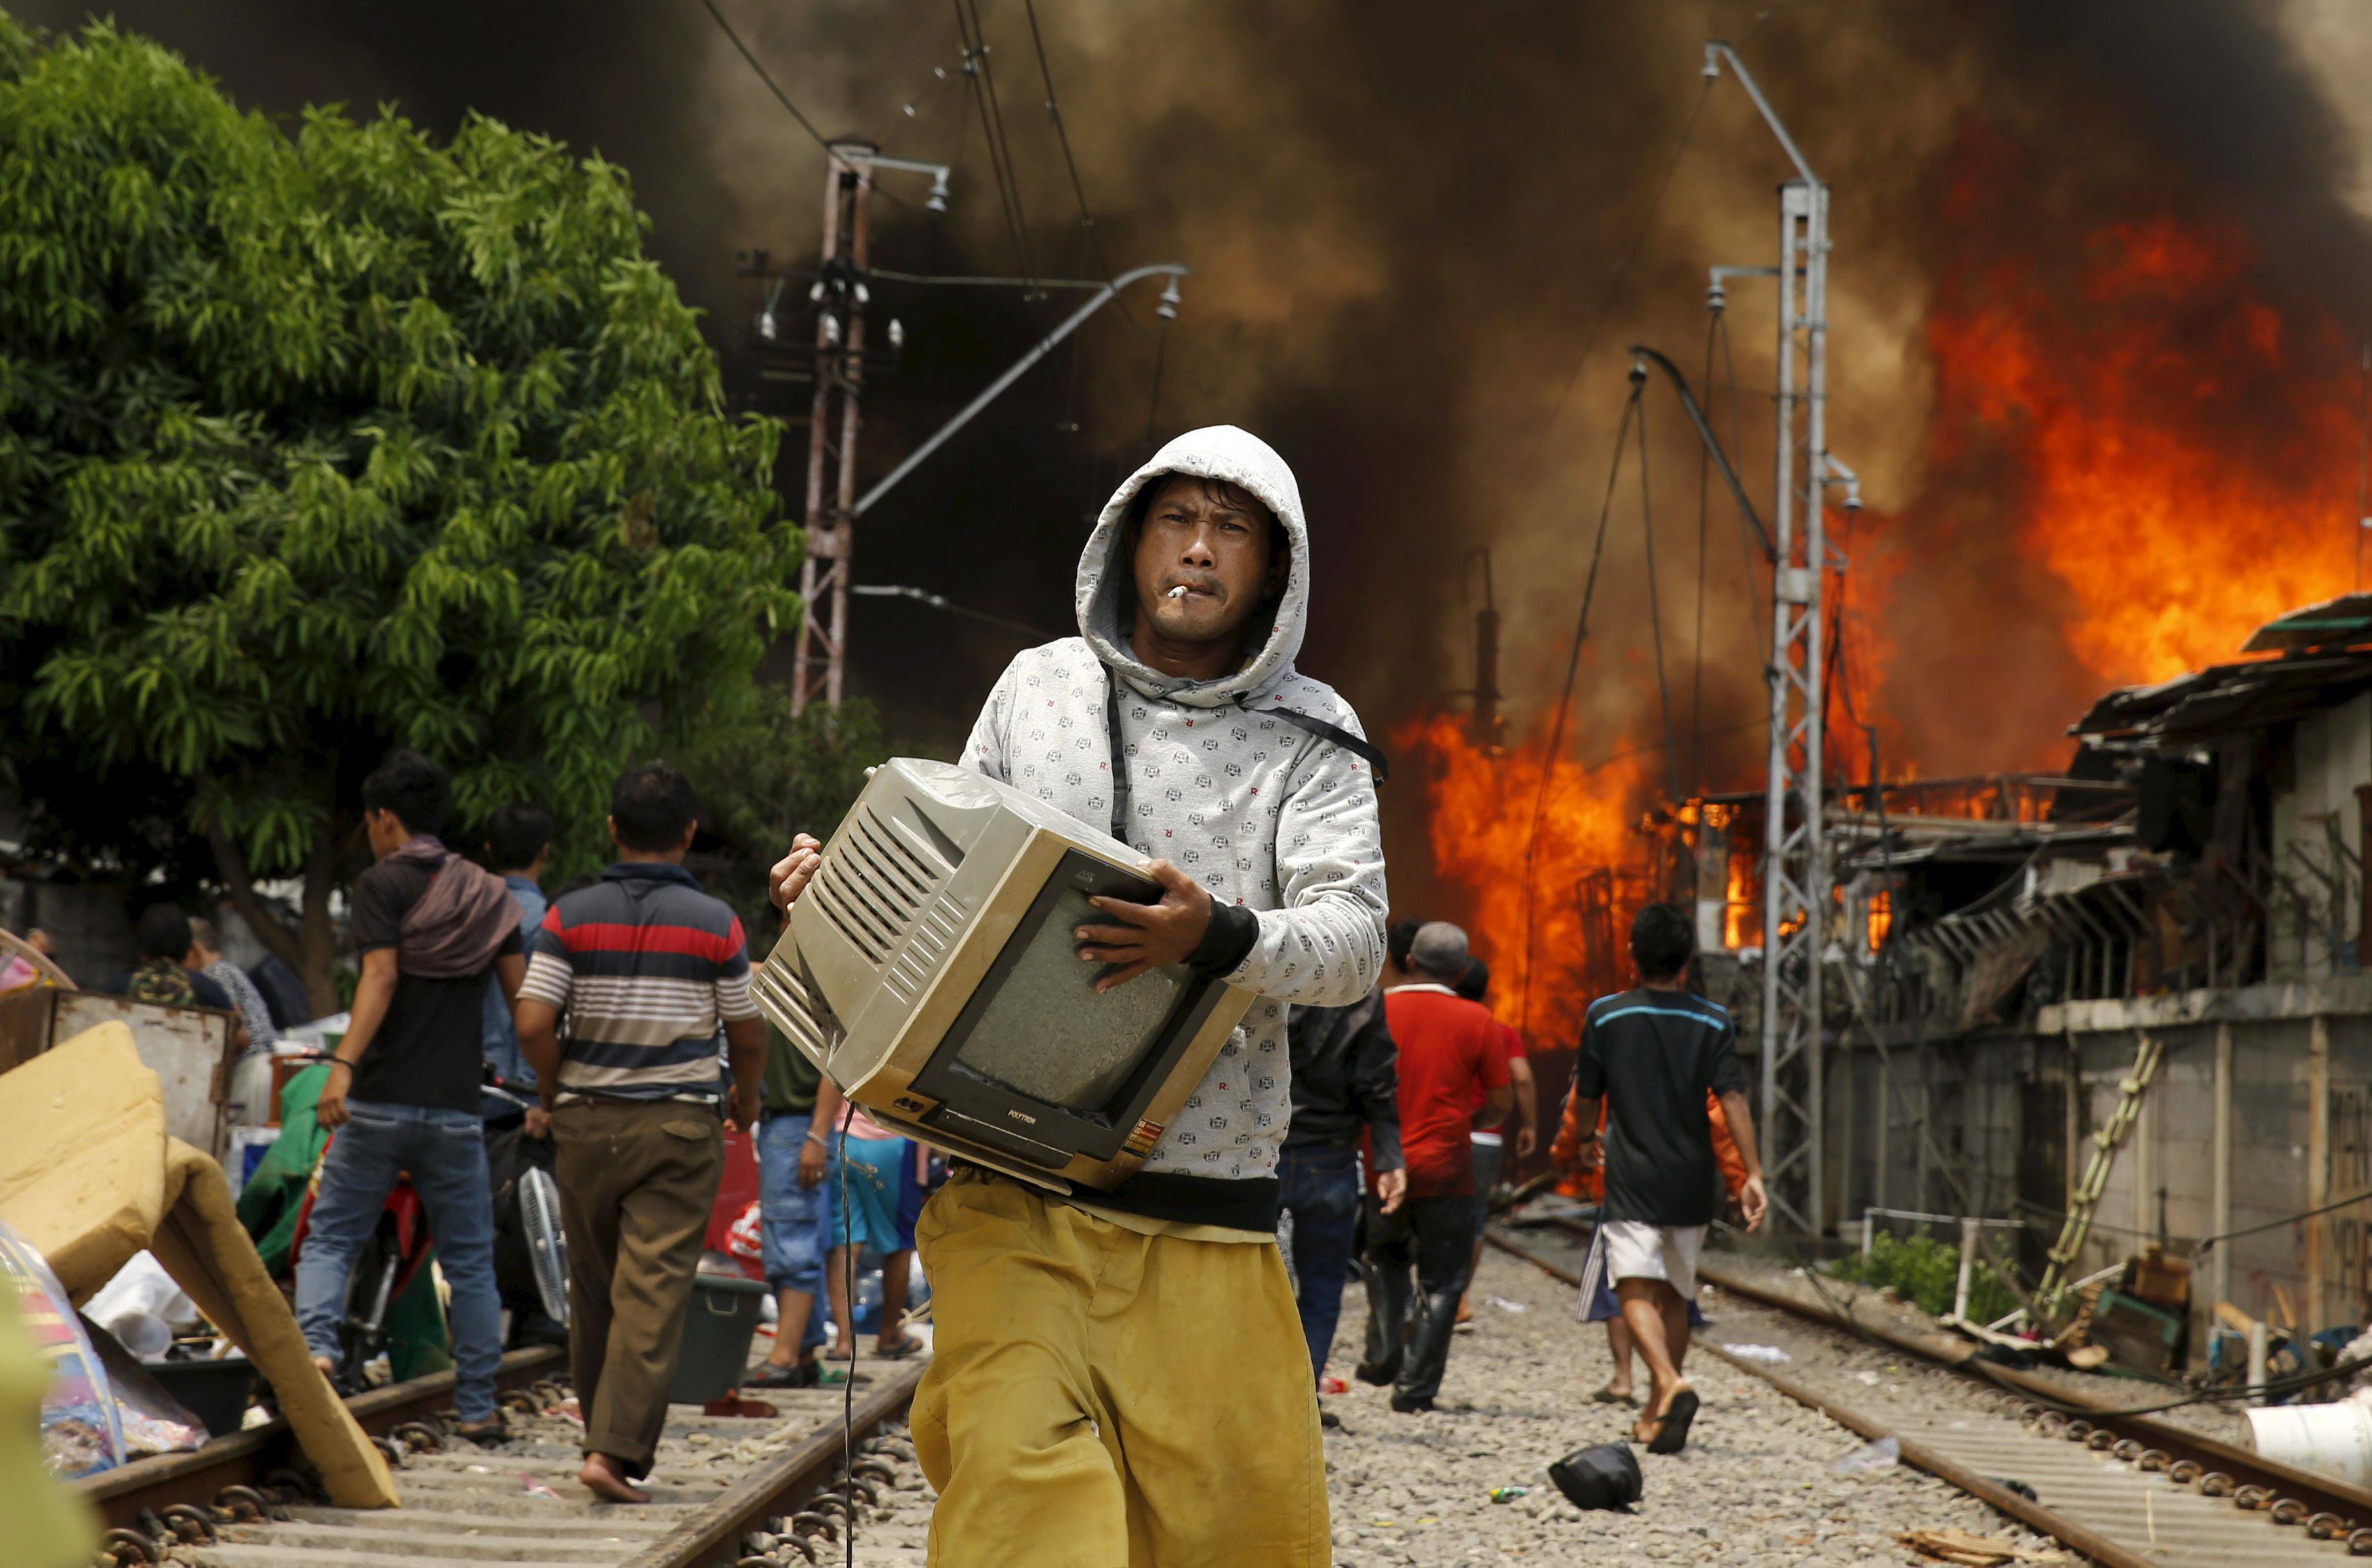 A man carries a television away from a fire in a slum area next to railway tracks in Kampung Bandan,